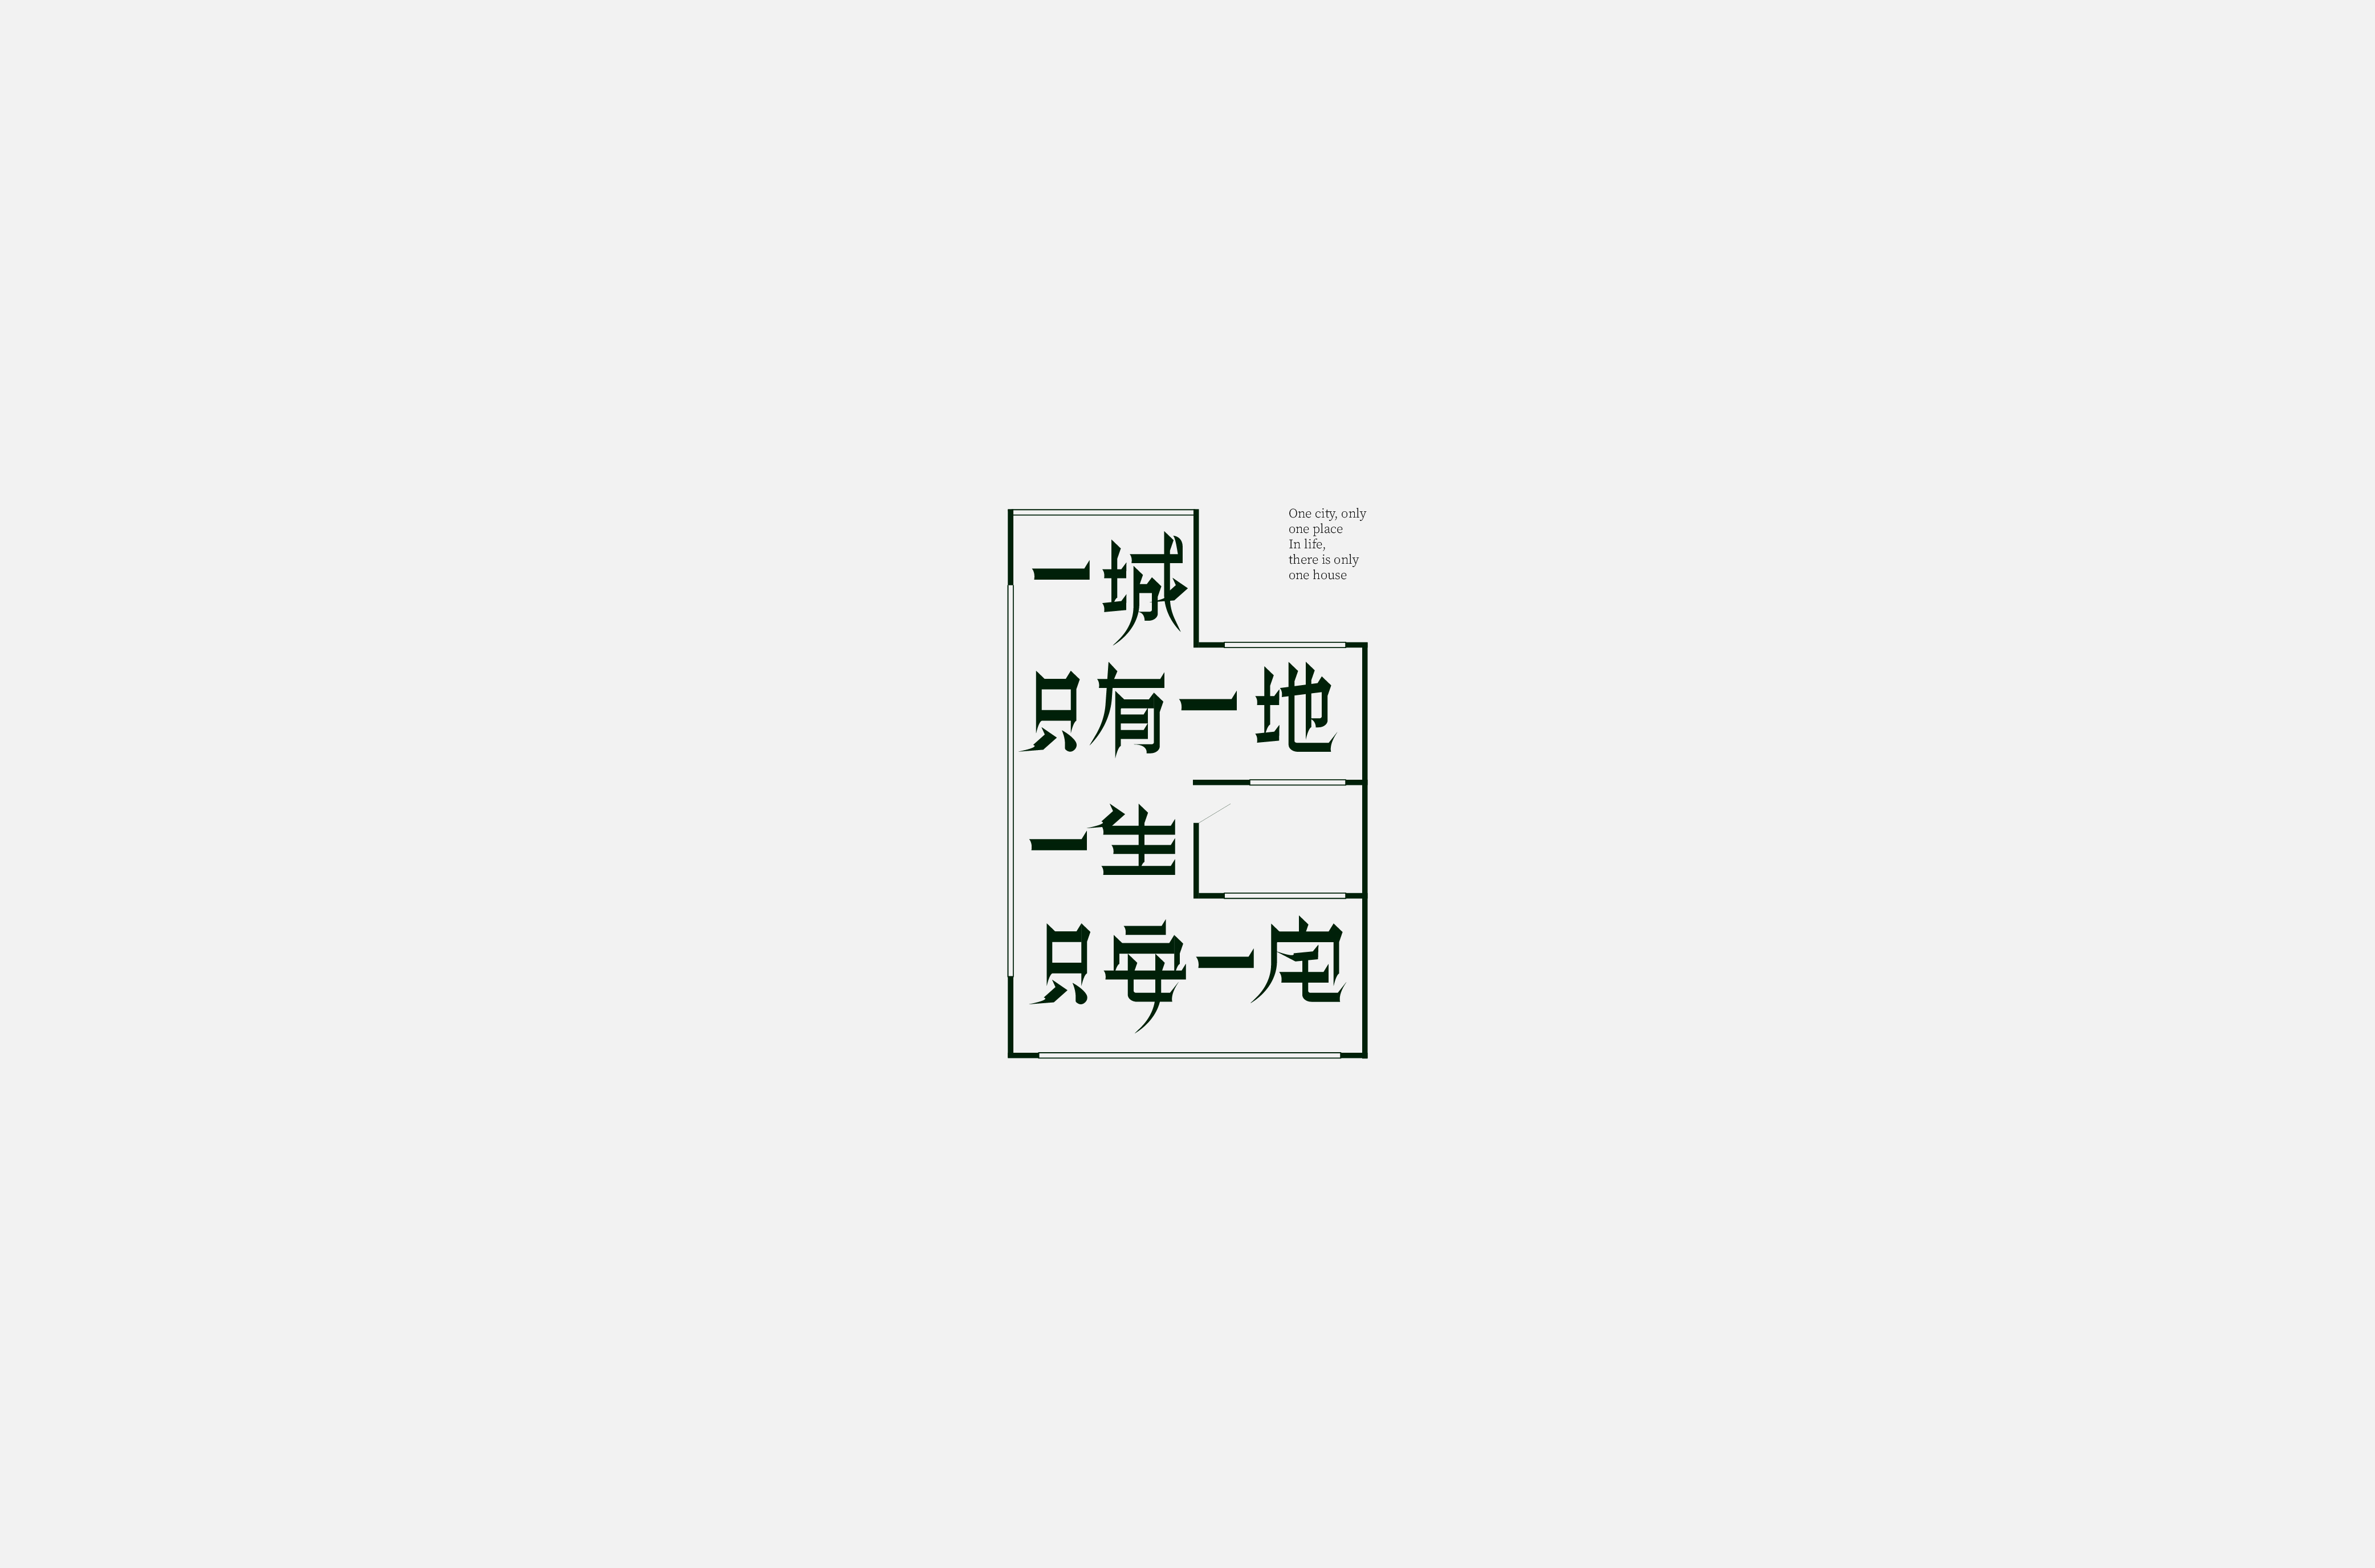 23P Collection of the latest Chinese font design schemes in 2021 #.609